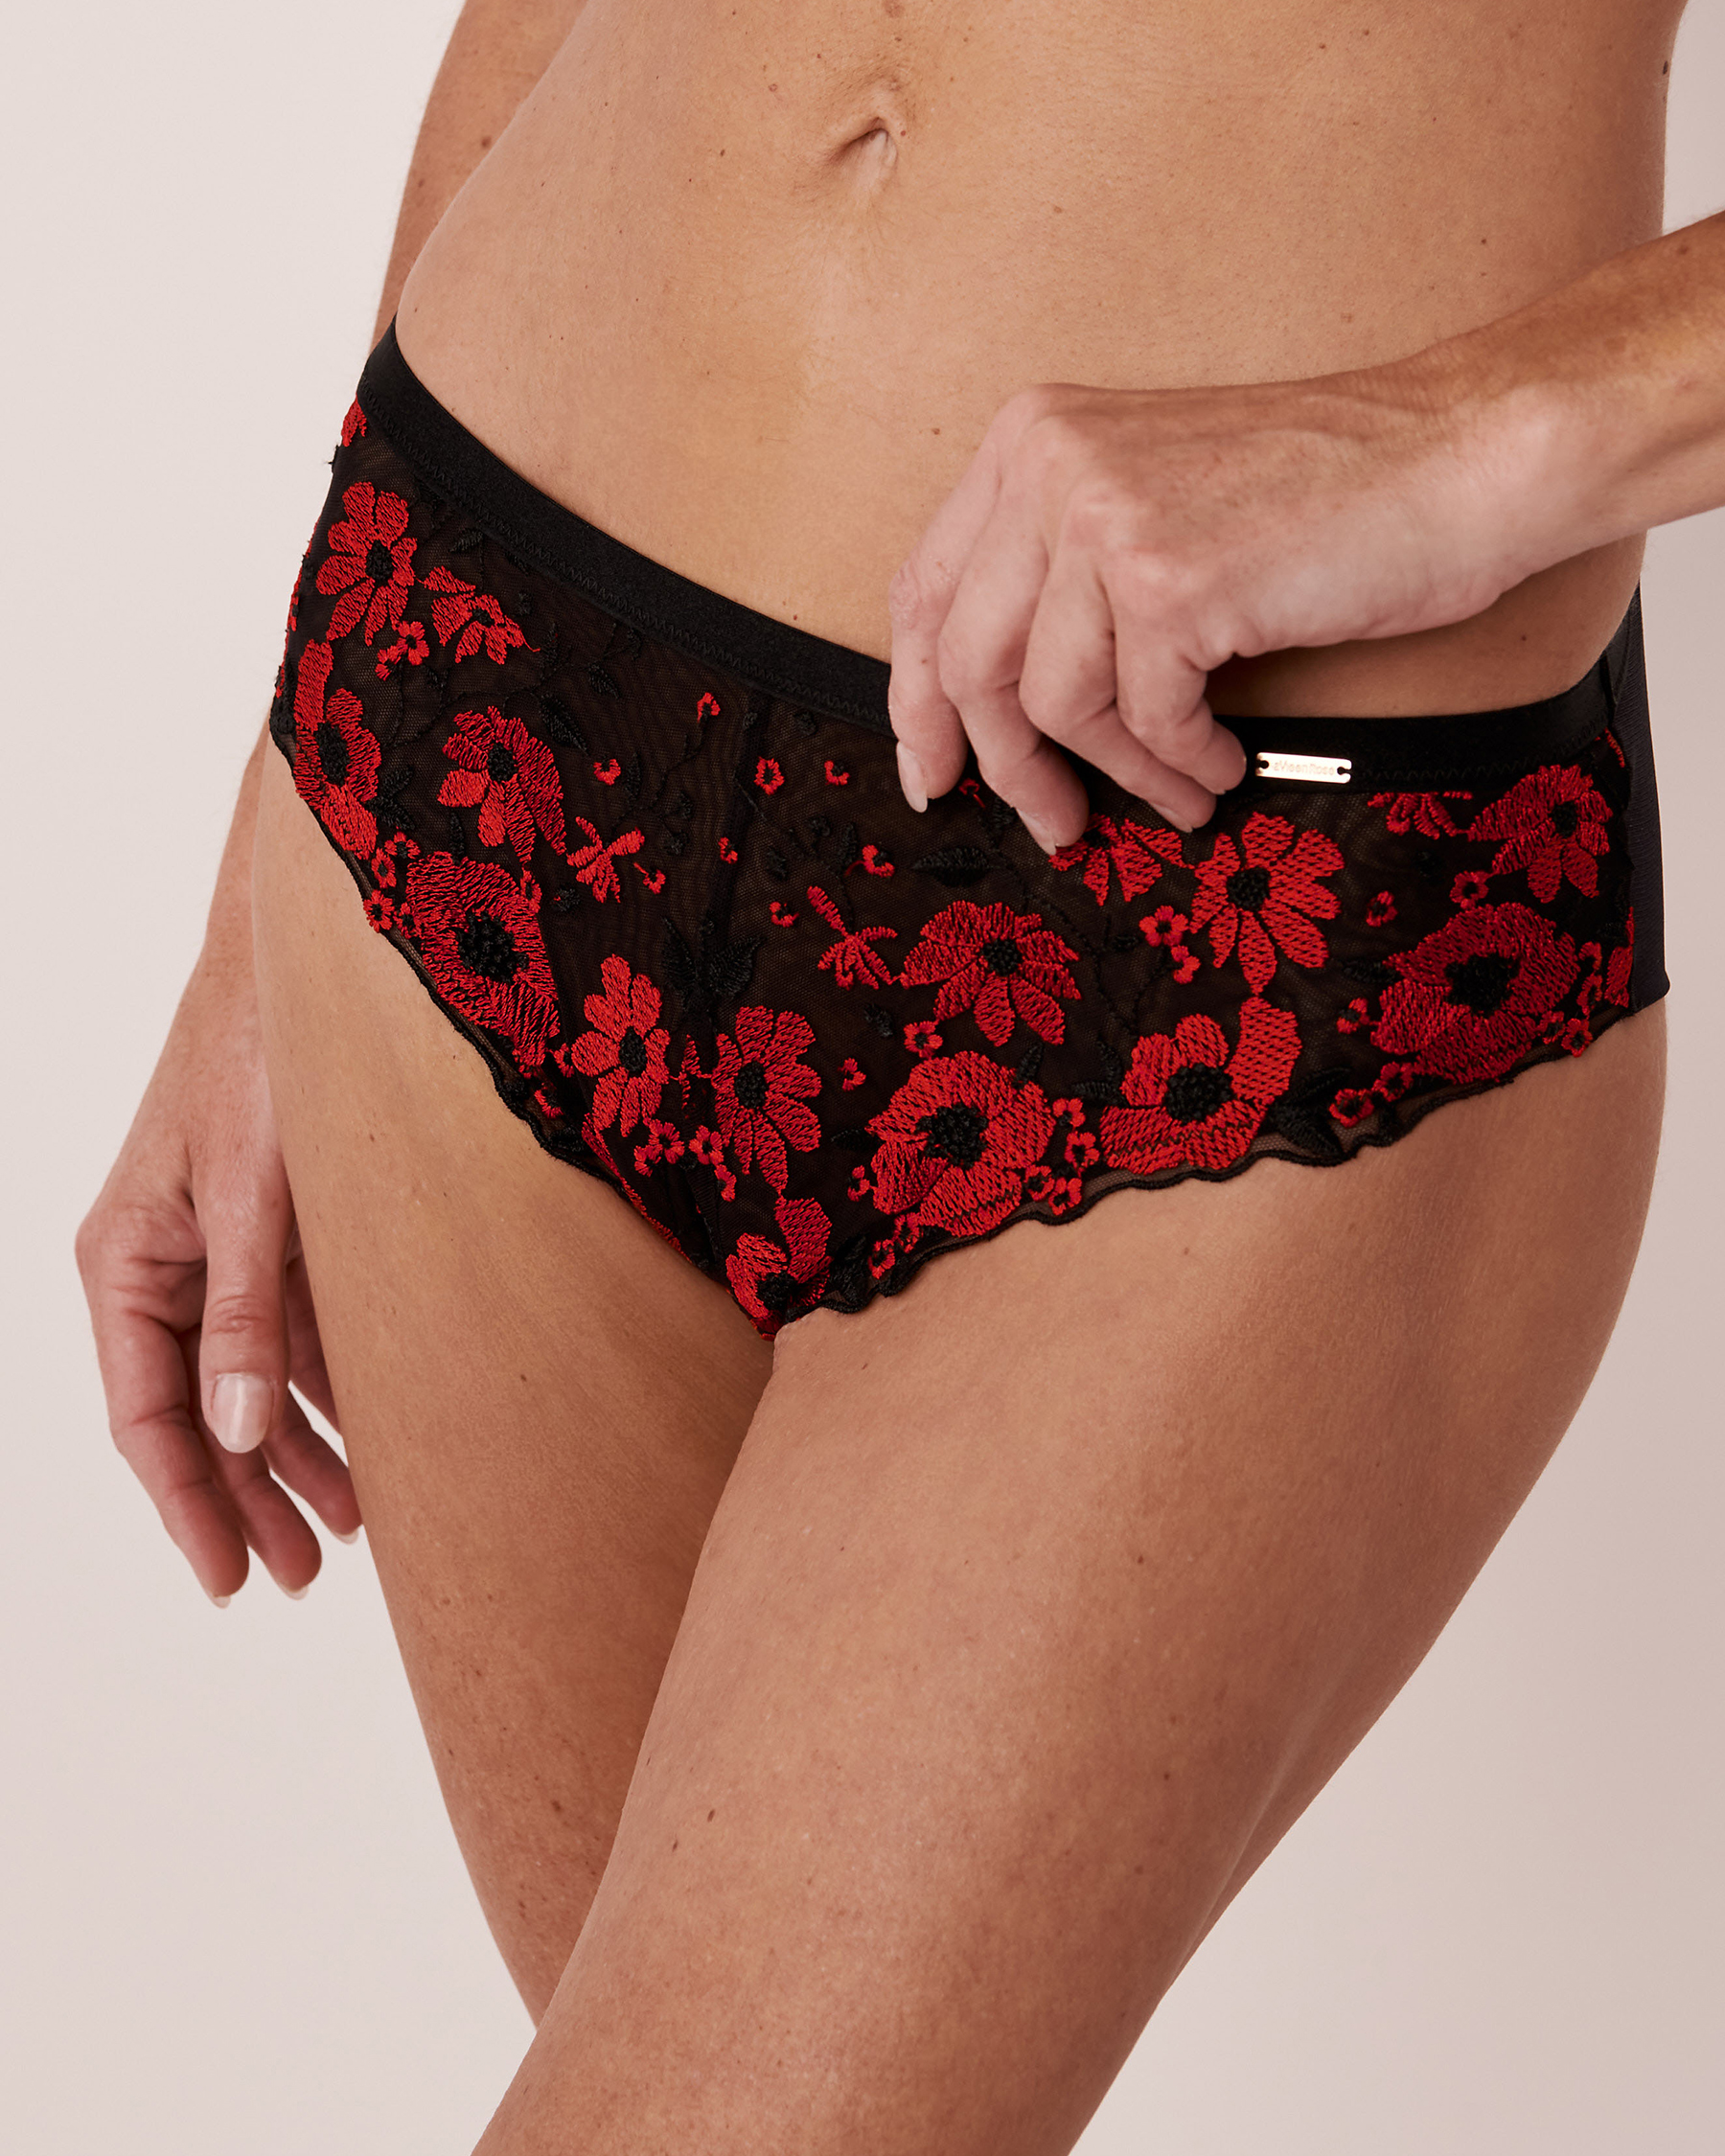 LA VIE EN ROSE Embroidered Mesh Cheeky Panty Flower embroidery 20300164 - View1